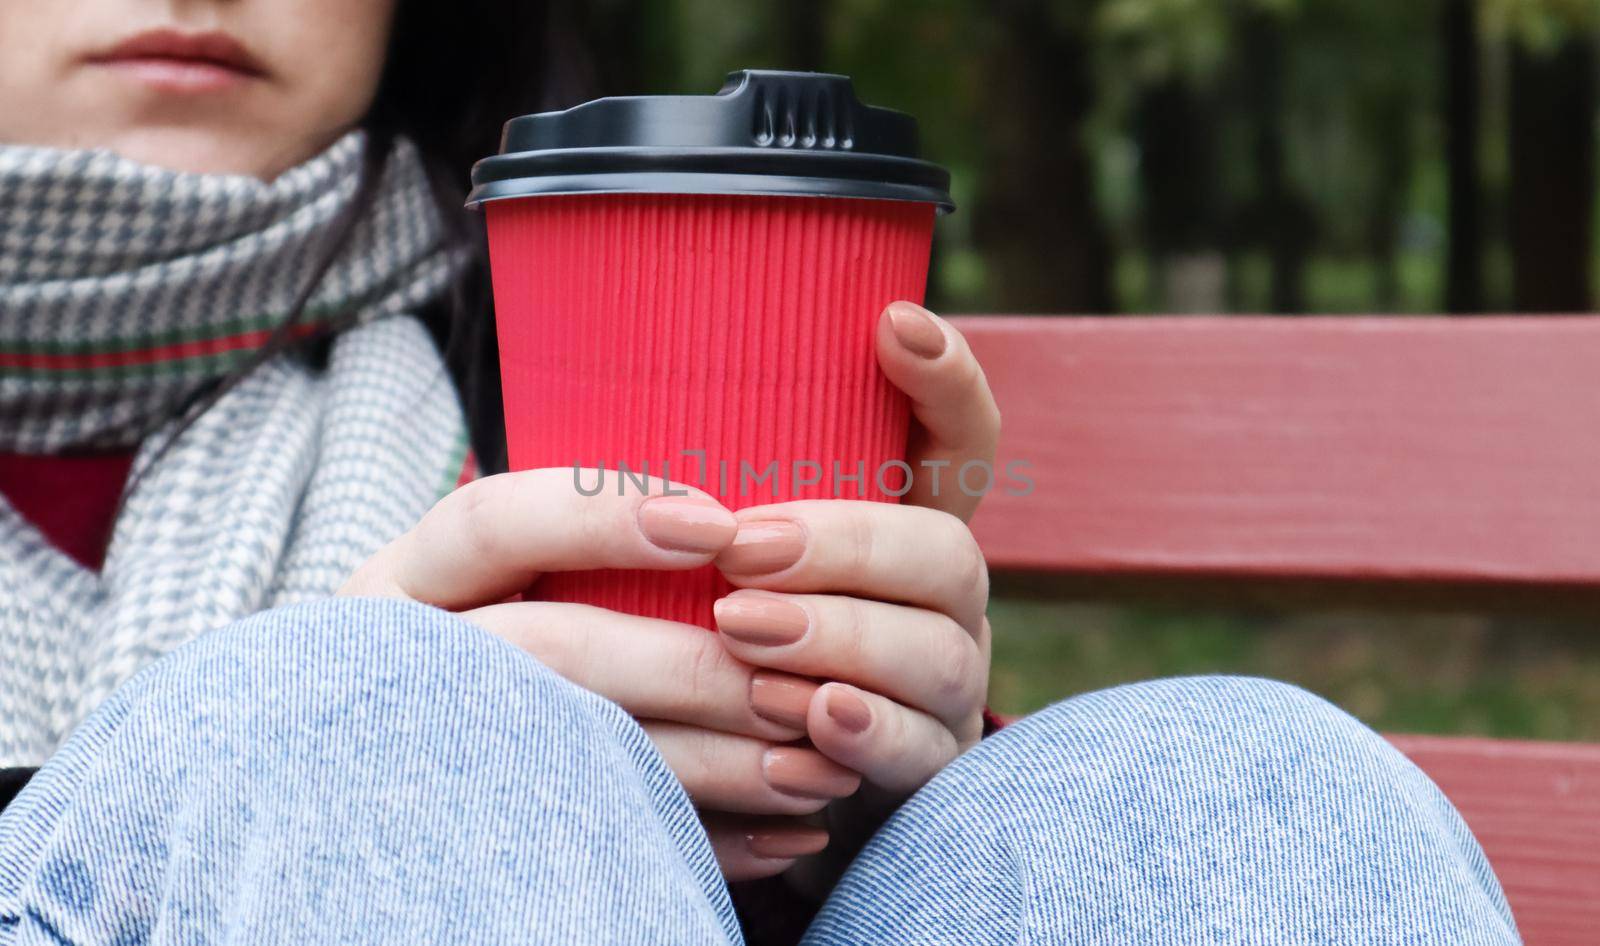 Young stylish woman in a coat and scarf drinks morning hot coffee in a red eco paper glass outdoors in an autumn park. Close-up of a young woman holding a takeaway coffee cup, shallow depth of field by Roshchyn